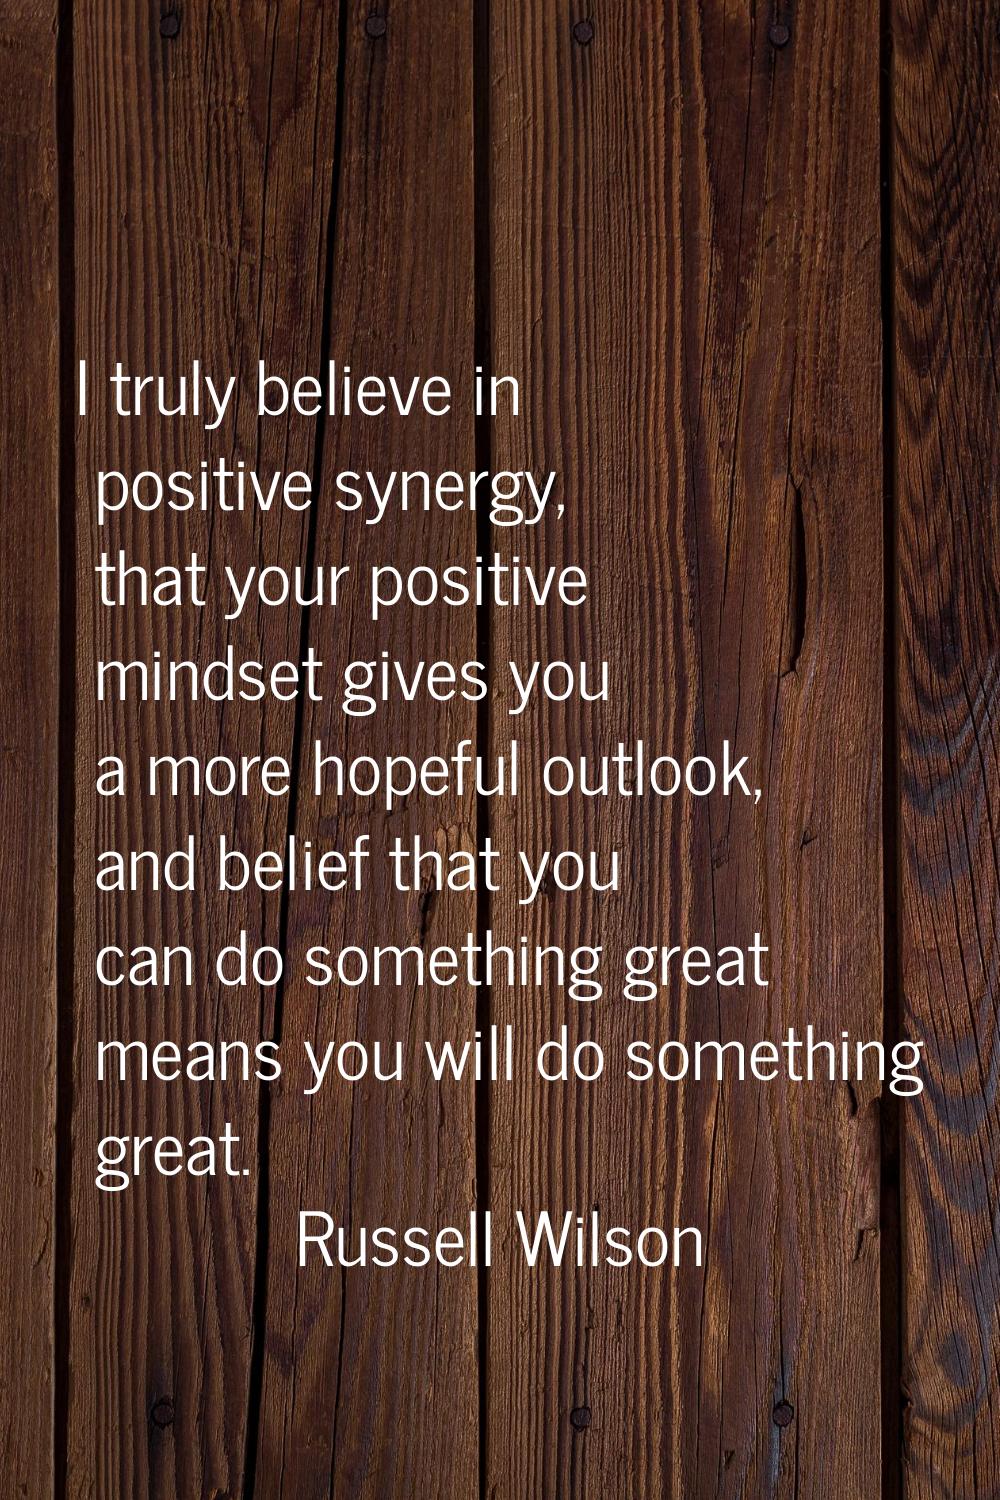 I truly believe in positive synergy, that your positive mindset gives you a more hopeful outlook, a